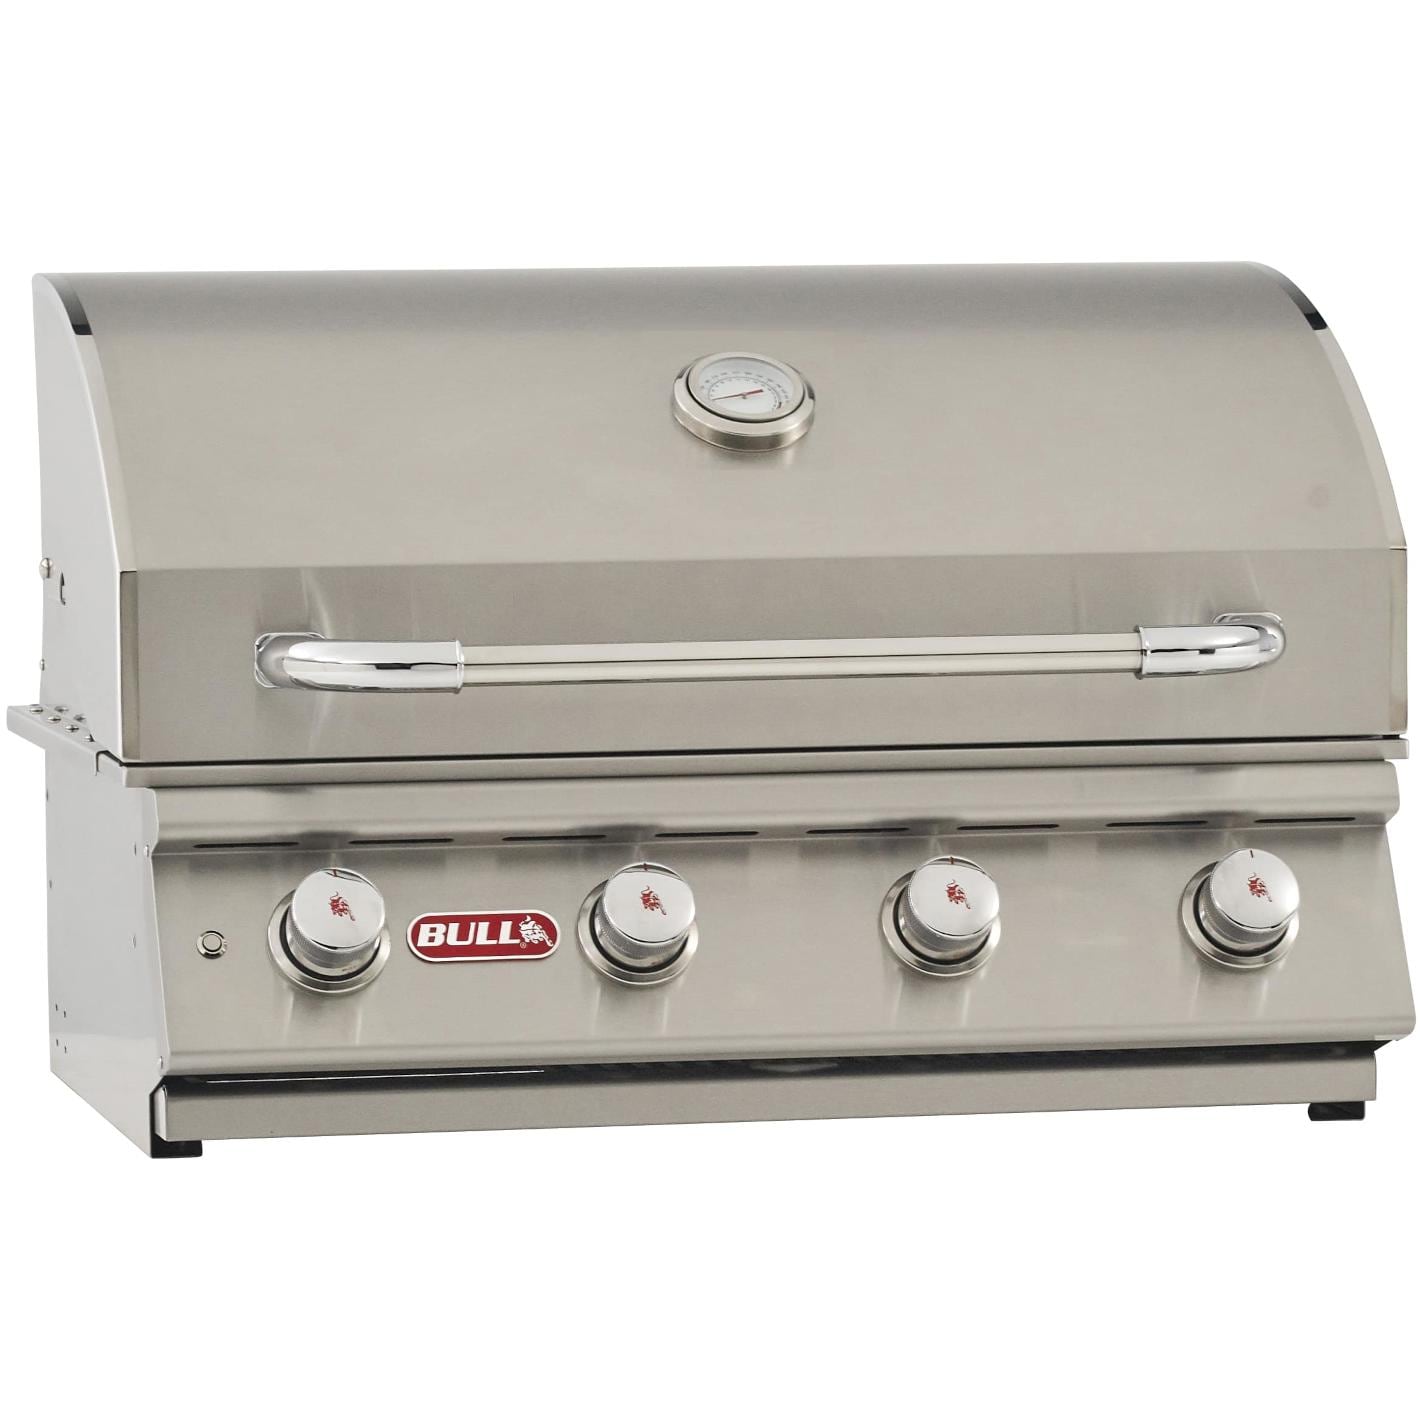 Bull Lonestar 4 Burner 30'' Stainless Steel Gas Barbecue Grill Head, Natural Gas - image 1 of 3